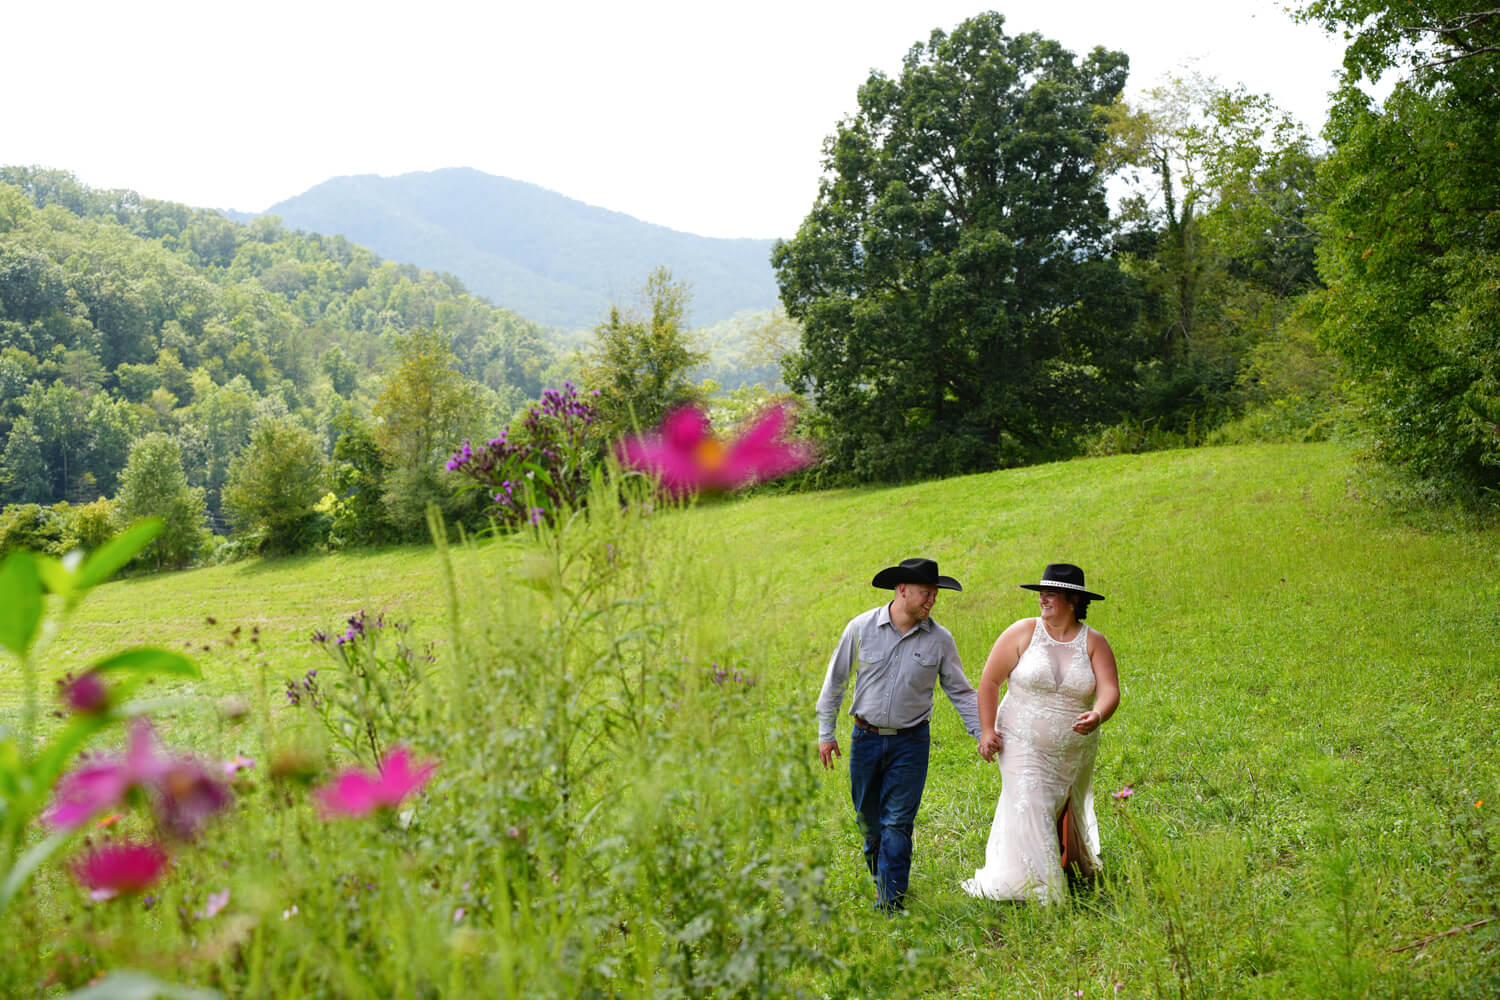 Western wedding couple with black cowboy hats walking in a meadow with a mountain ridge background in Gatlinburg Tennessee